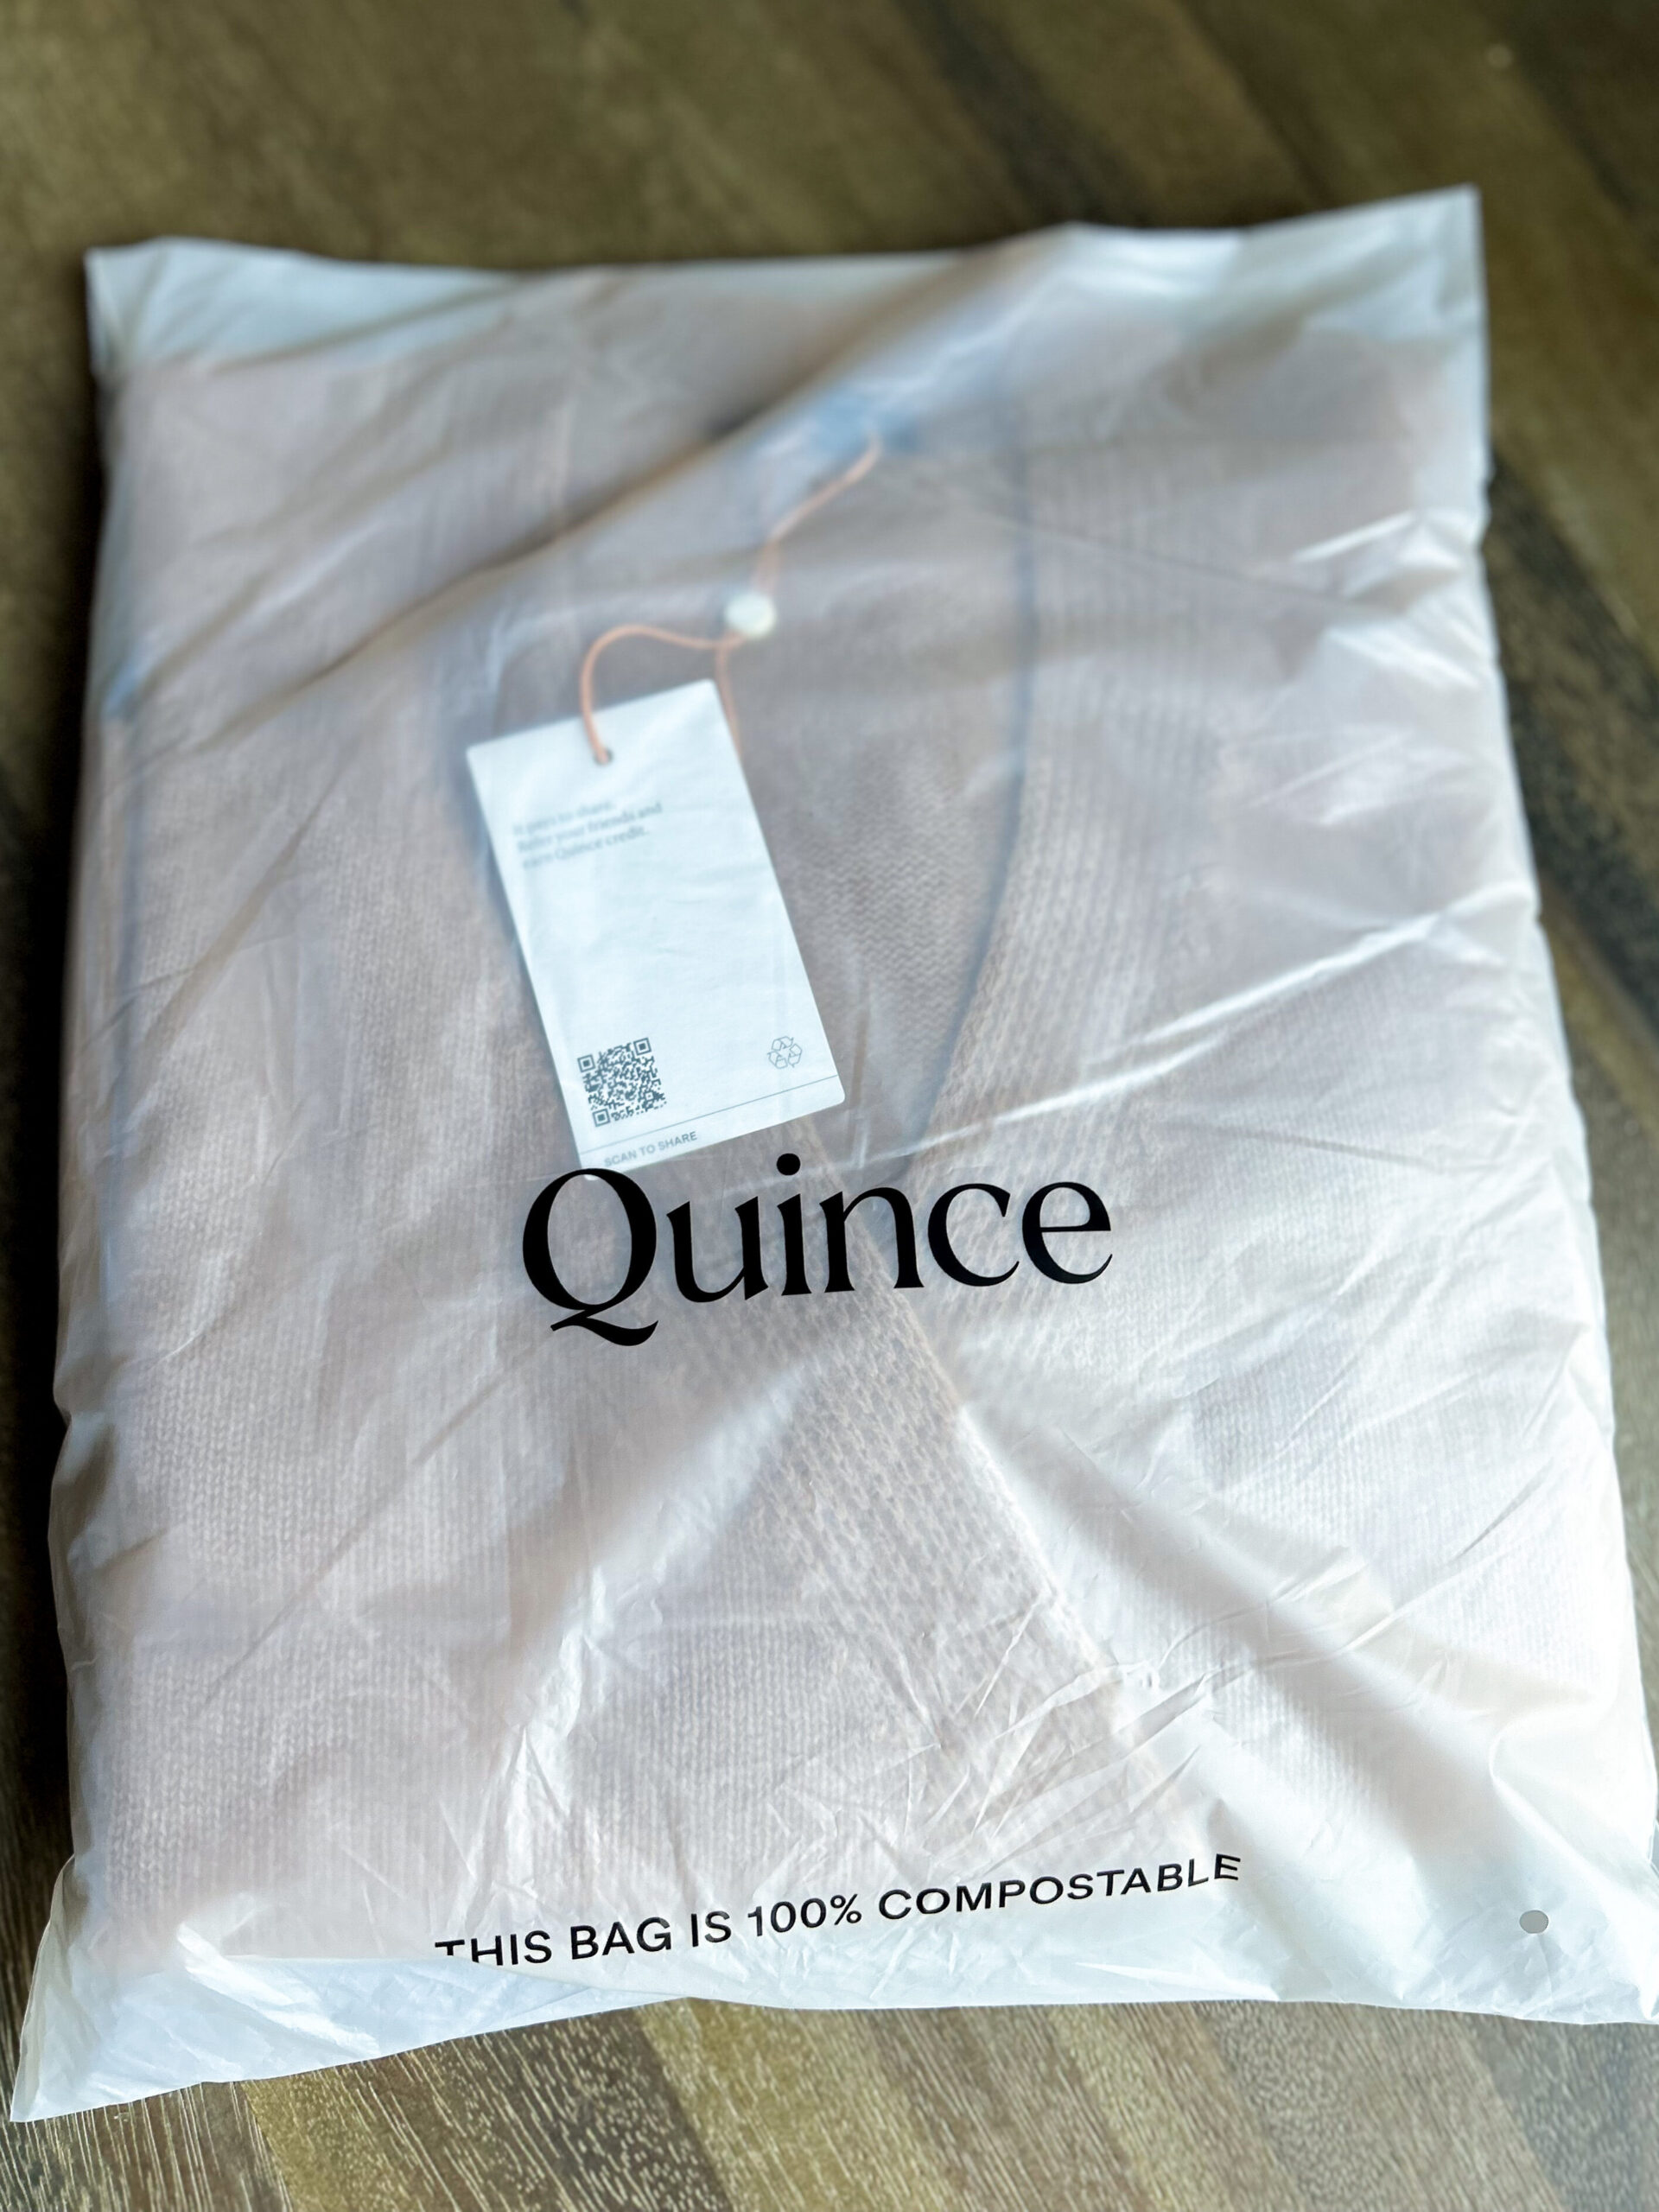 A bag with the word quince on it.